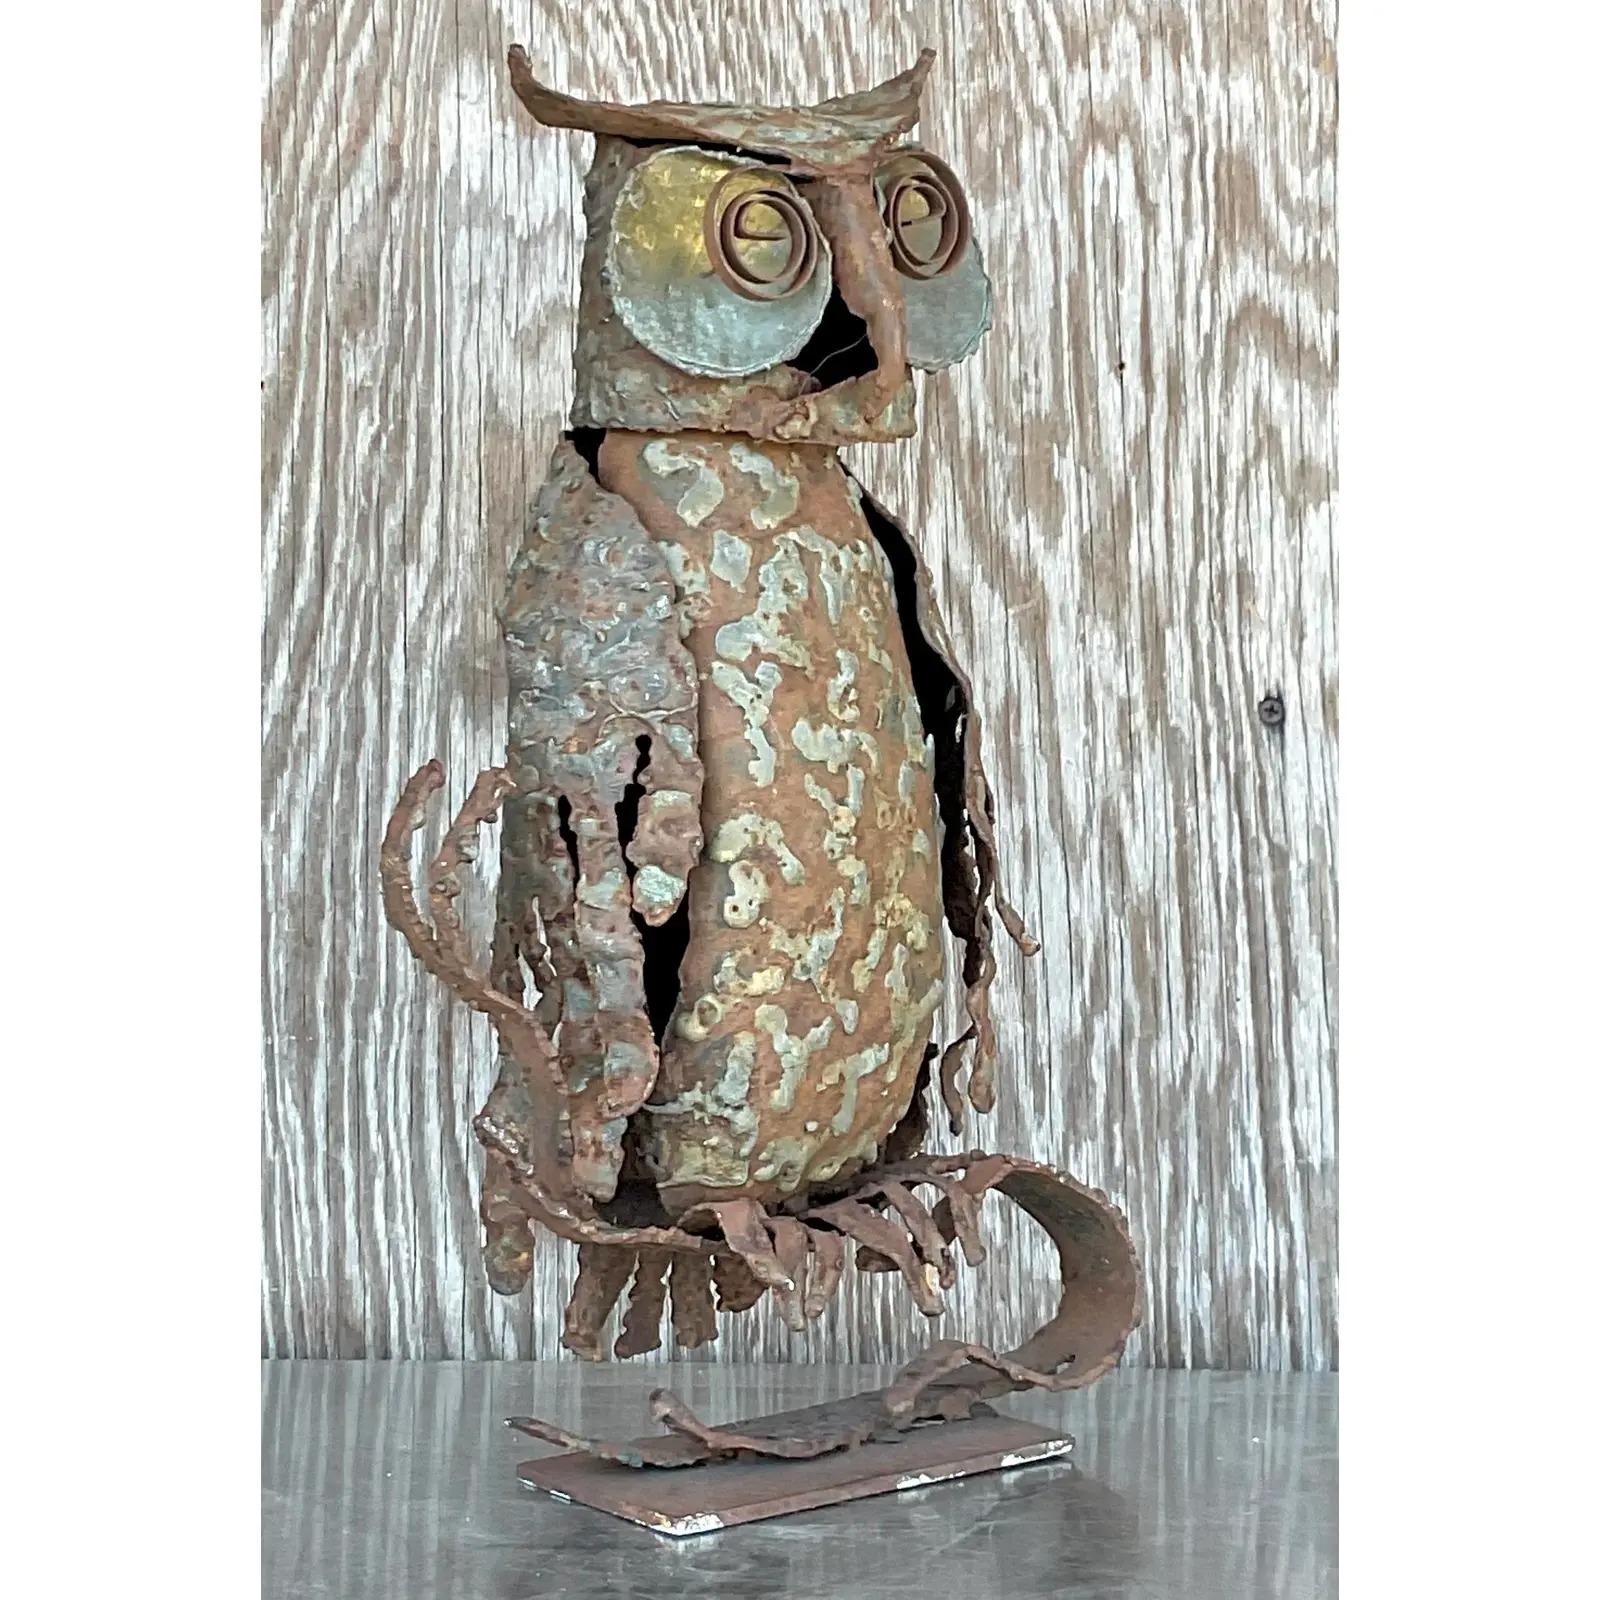 A fantastic vintage Boho sculpture. A chic little brutalist owl in torch cut metal. A mixed metal gem. Acquired from a Palm Beach estate.